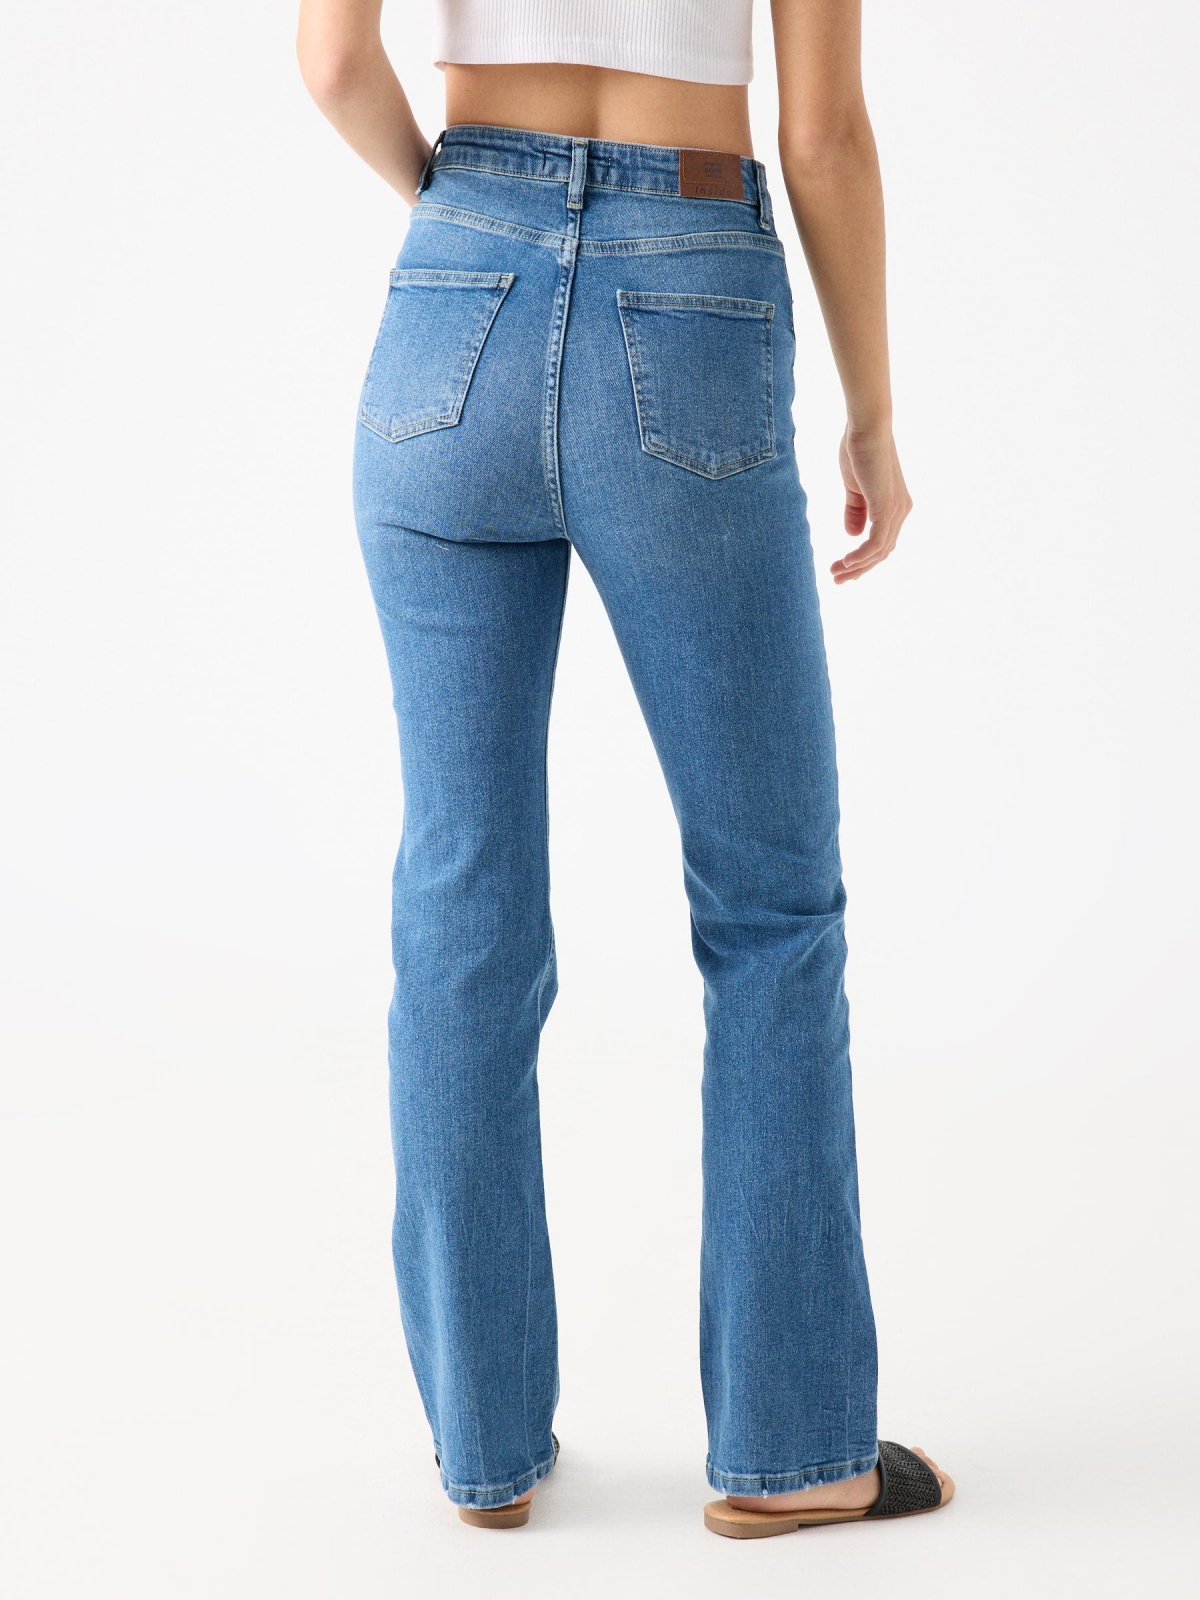 High waist straight slim jeans blue middle back view